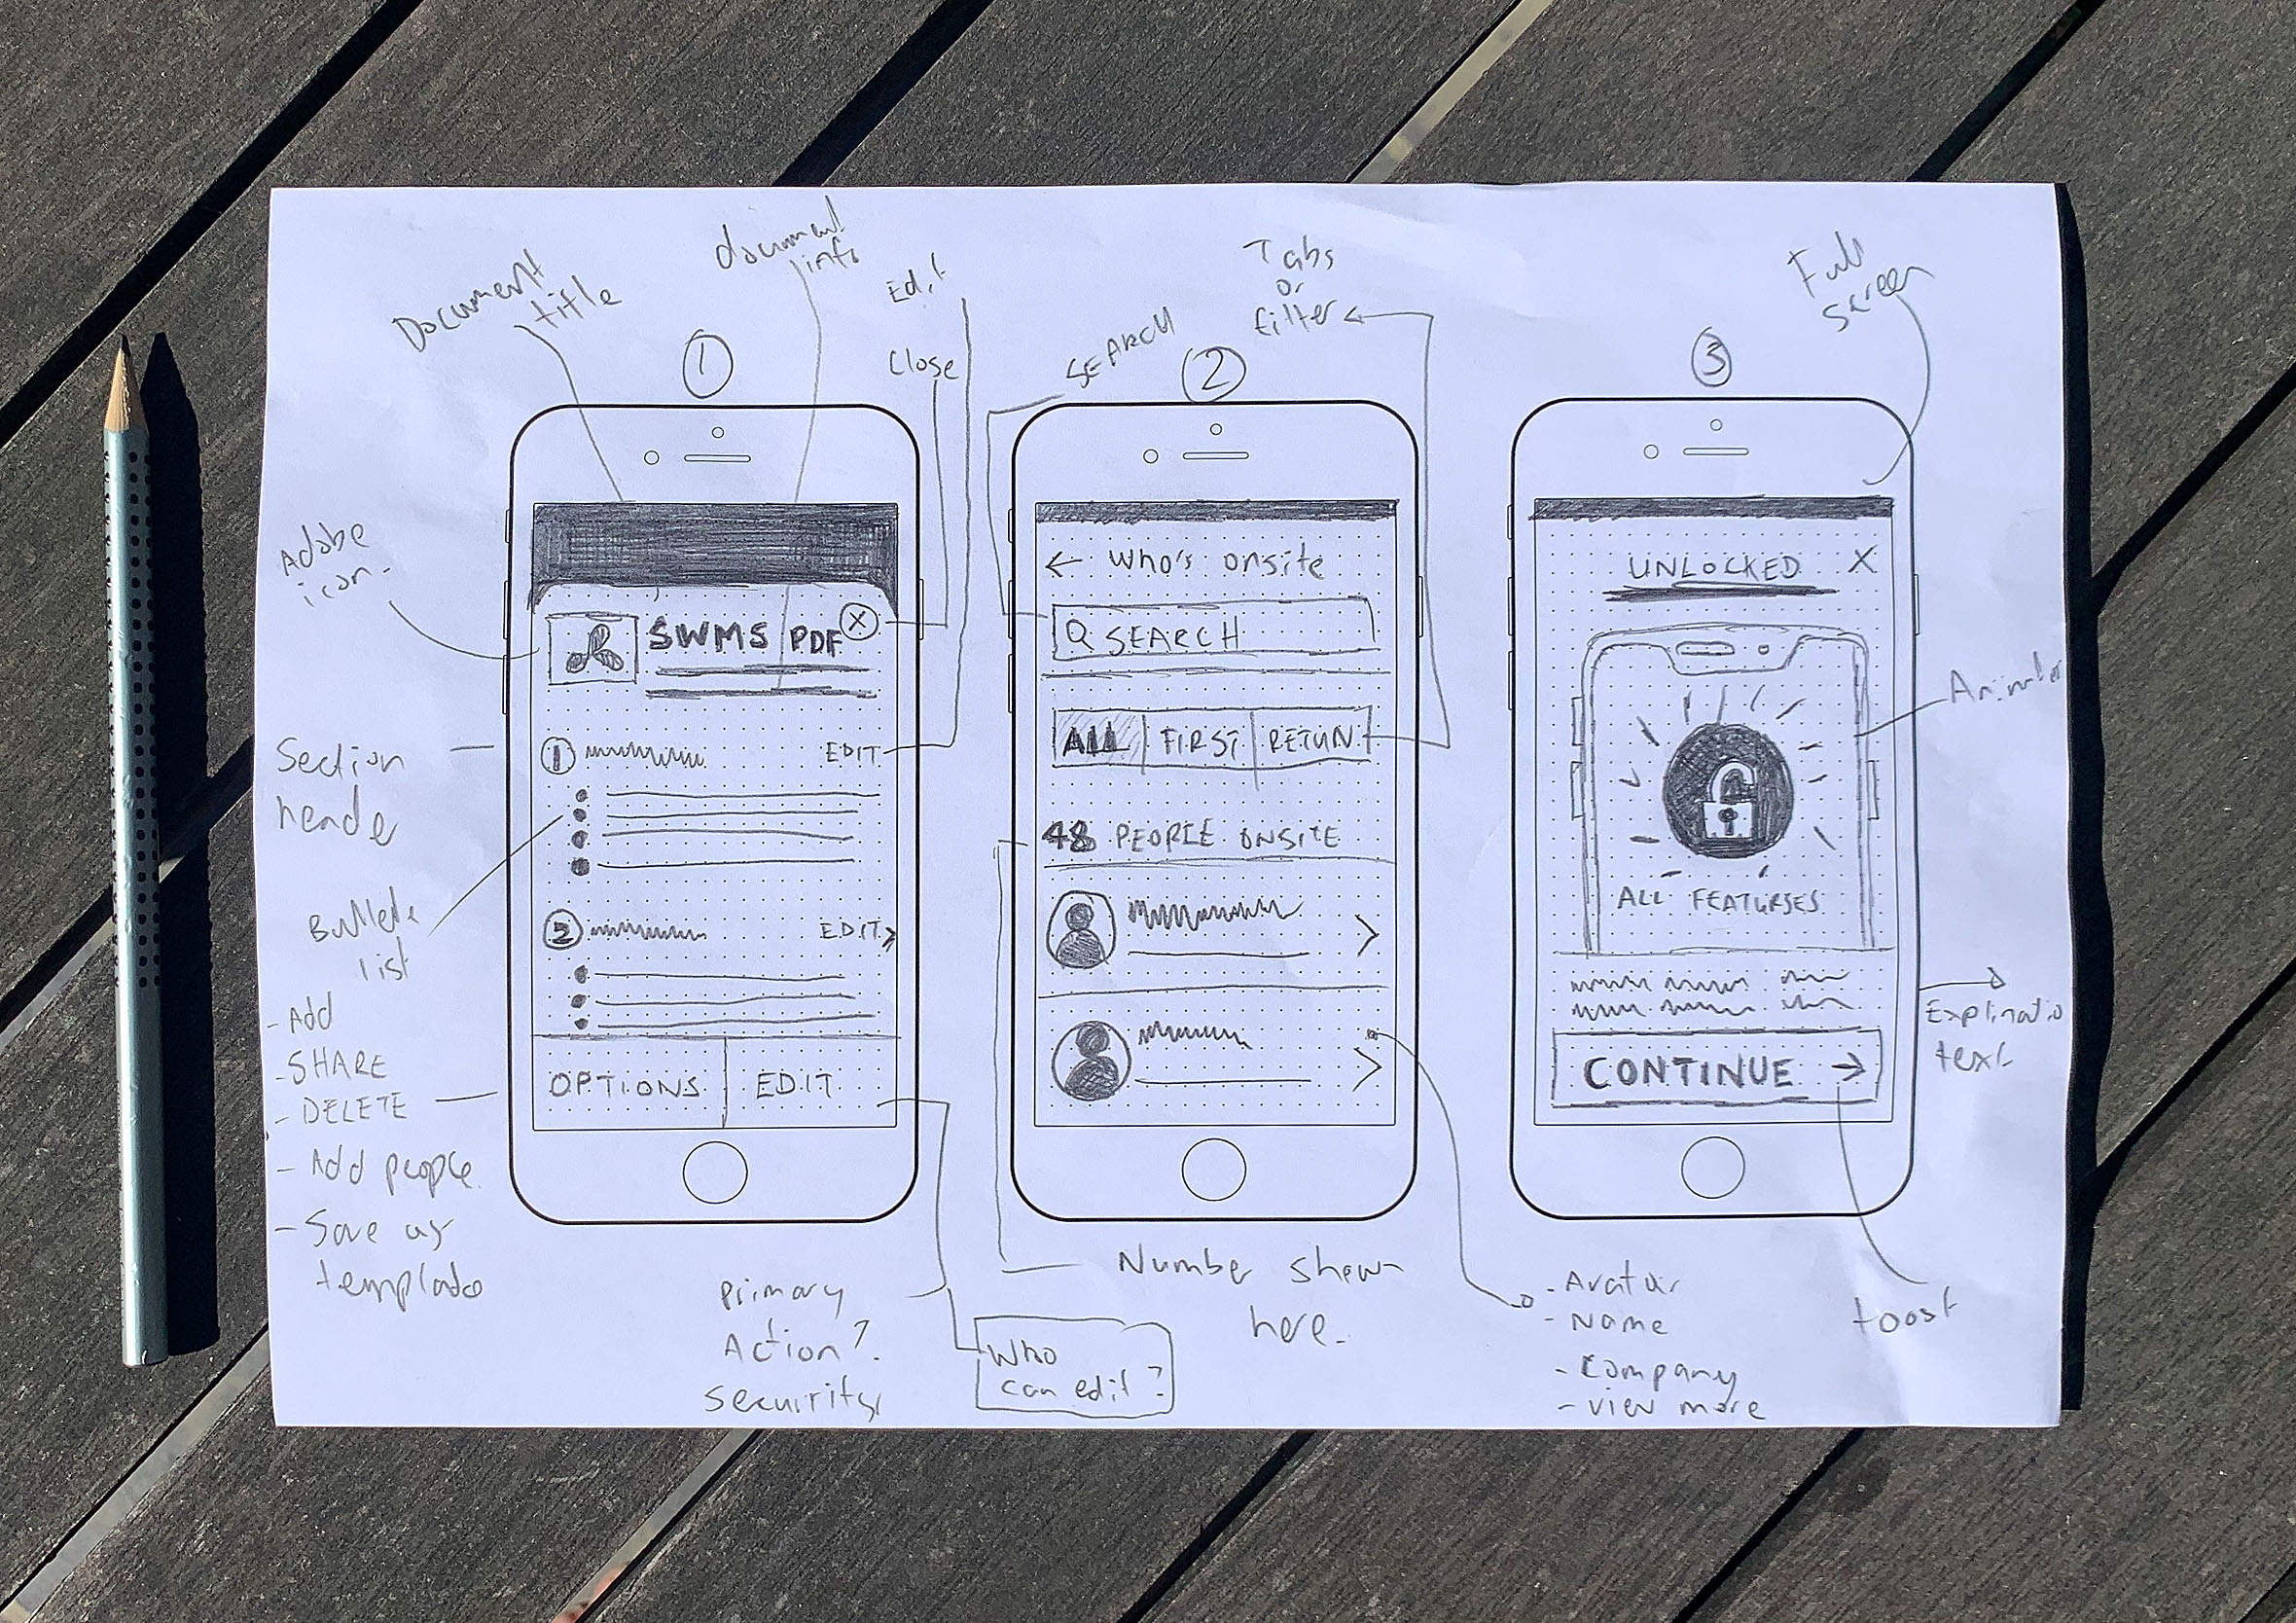 worksite health and safety app sketches